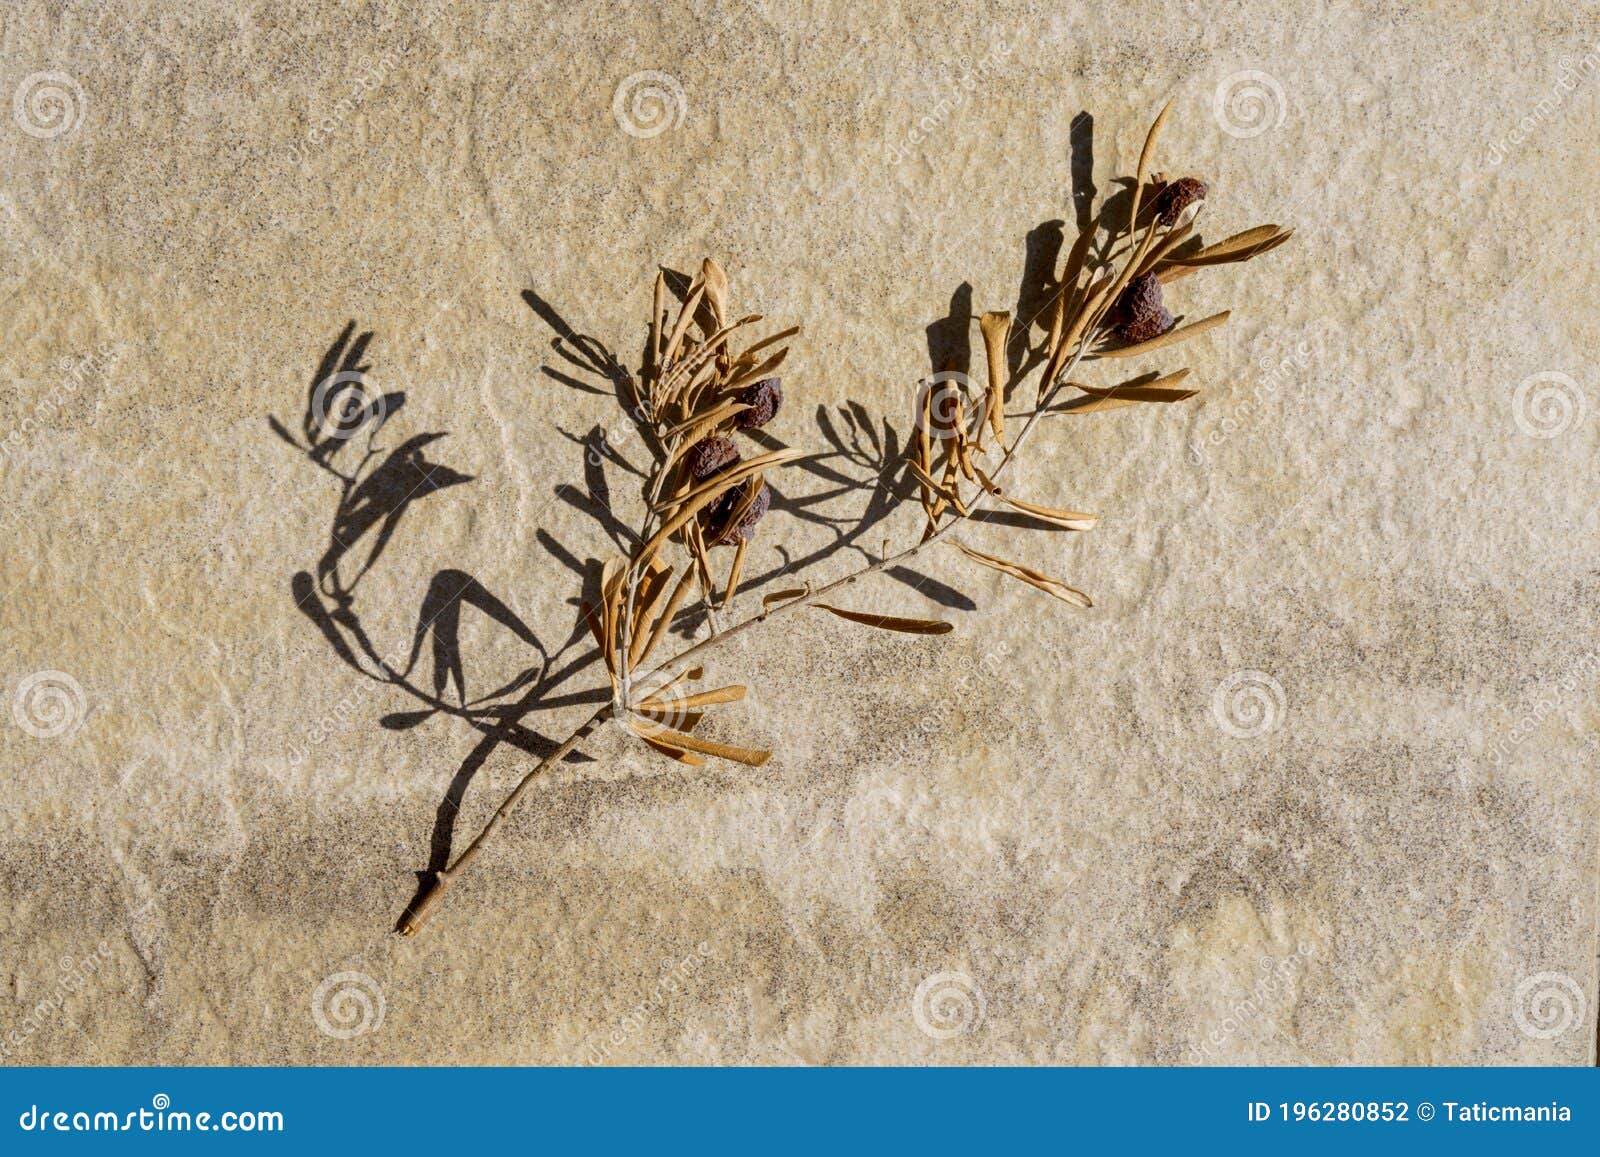 dry olive branch with dry leaves and dry olives on stone floor